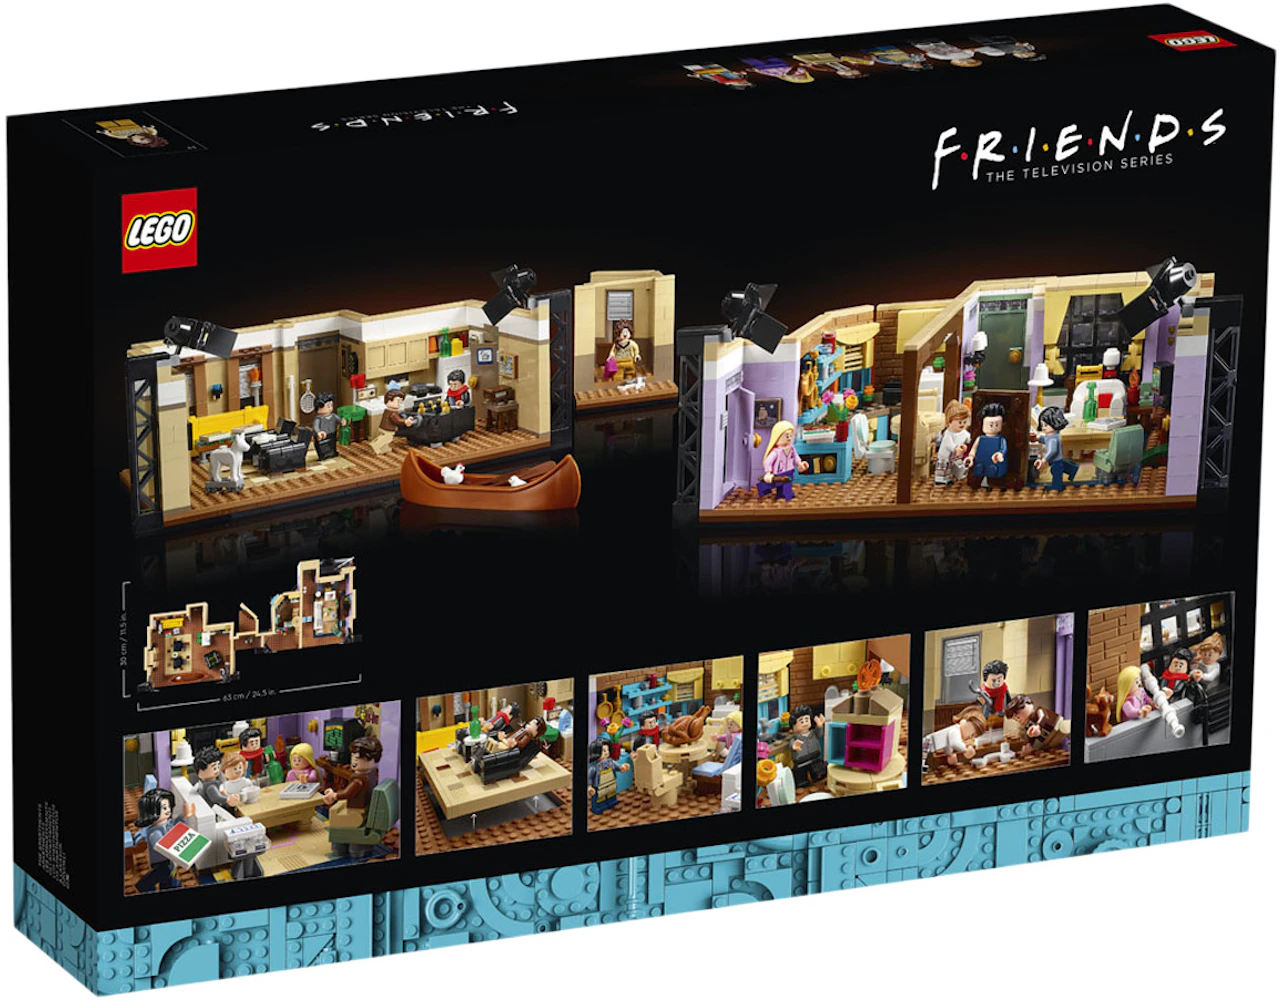 LEGO Friends The Apartments Set 10292 - SS21 - US